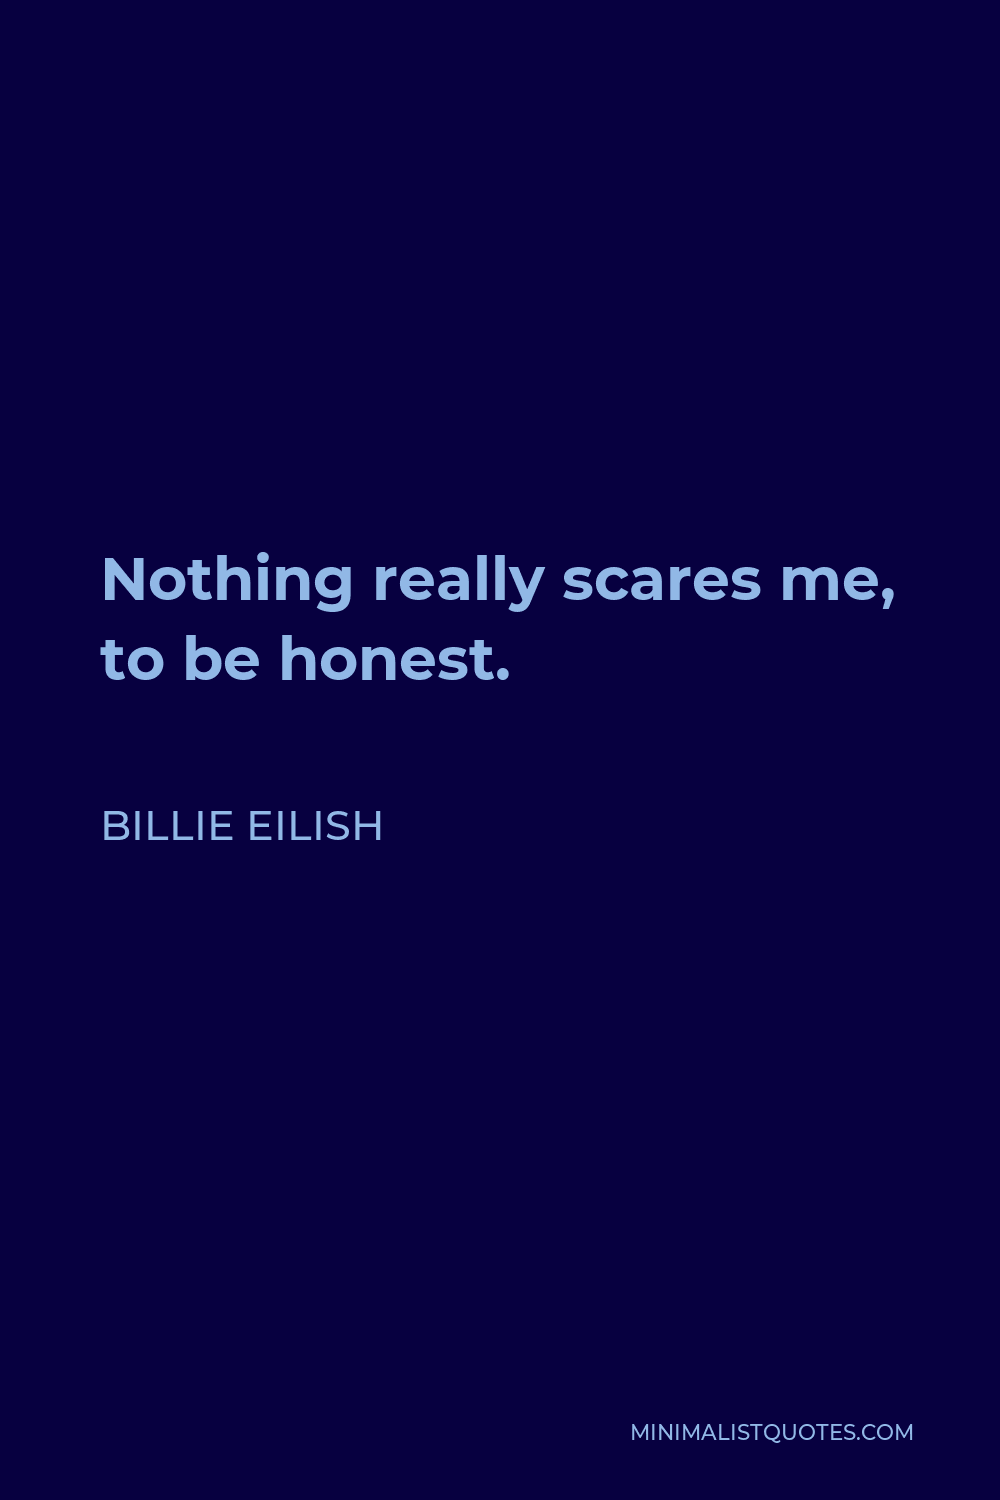 Billie Eilish Quote - Nothing really scares me, to be honest.